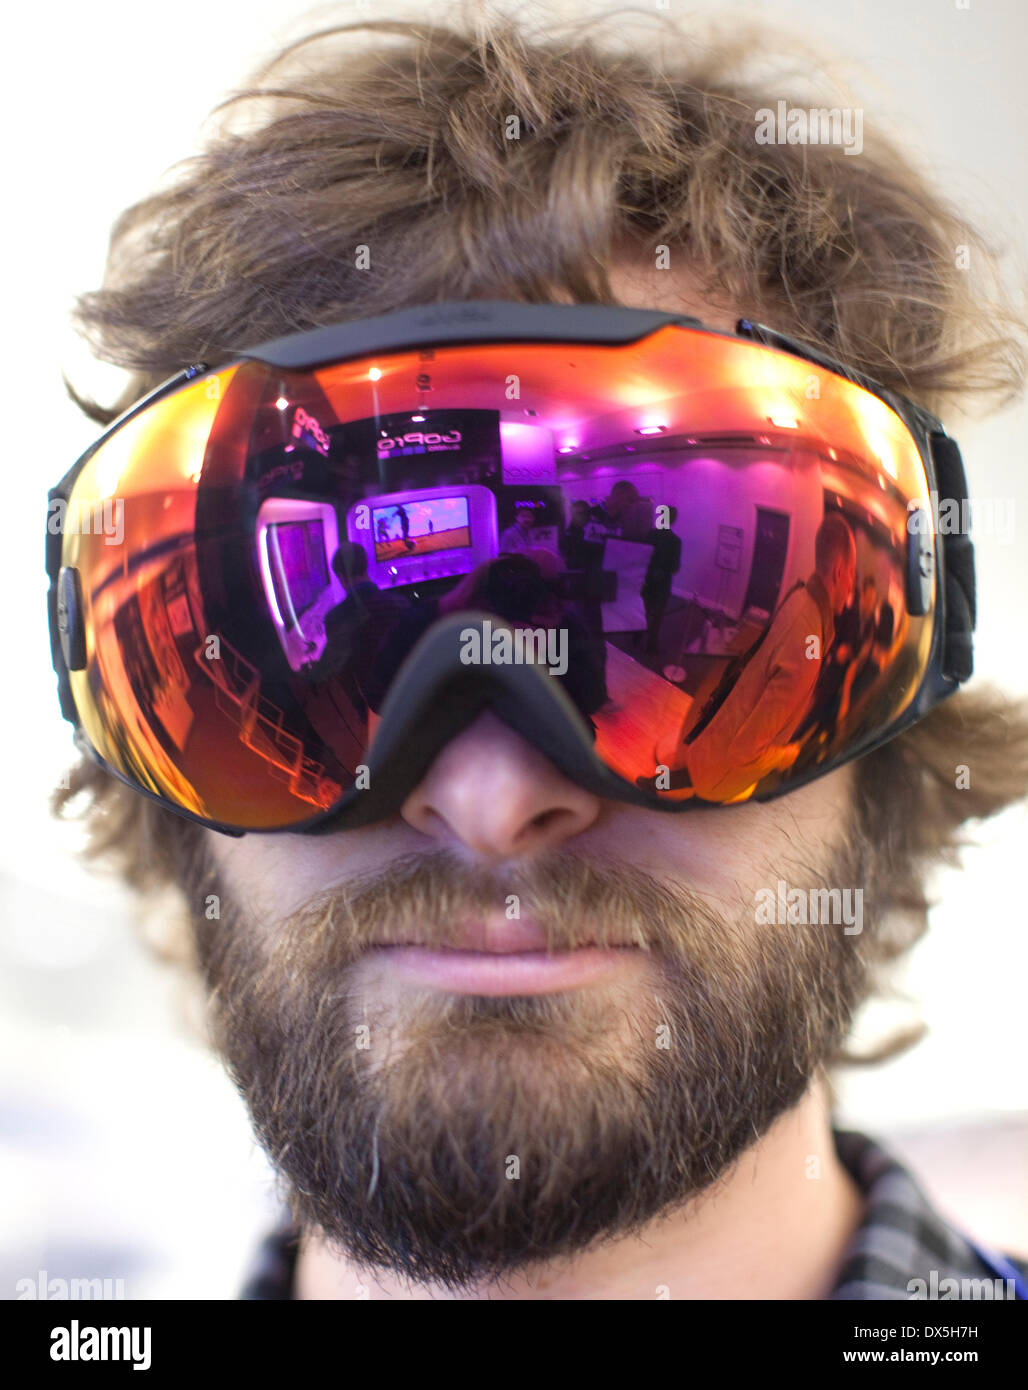 Wearable Technology Show, Olympia, London: Heads-Up Display (HUD) goggles by Recon Instruments Stock Photo